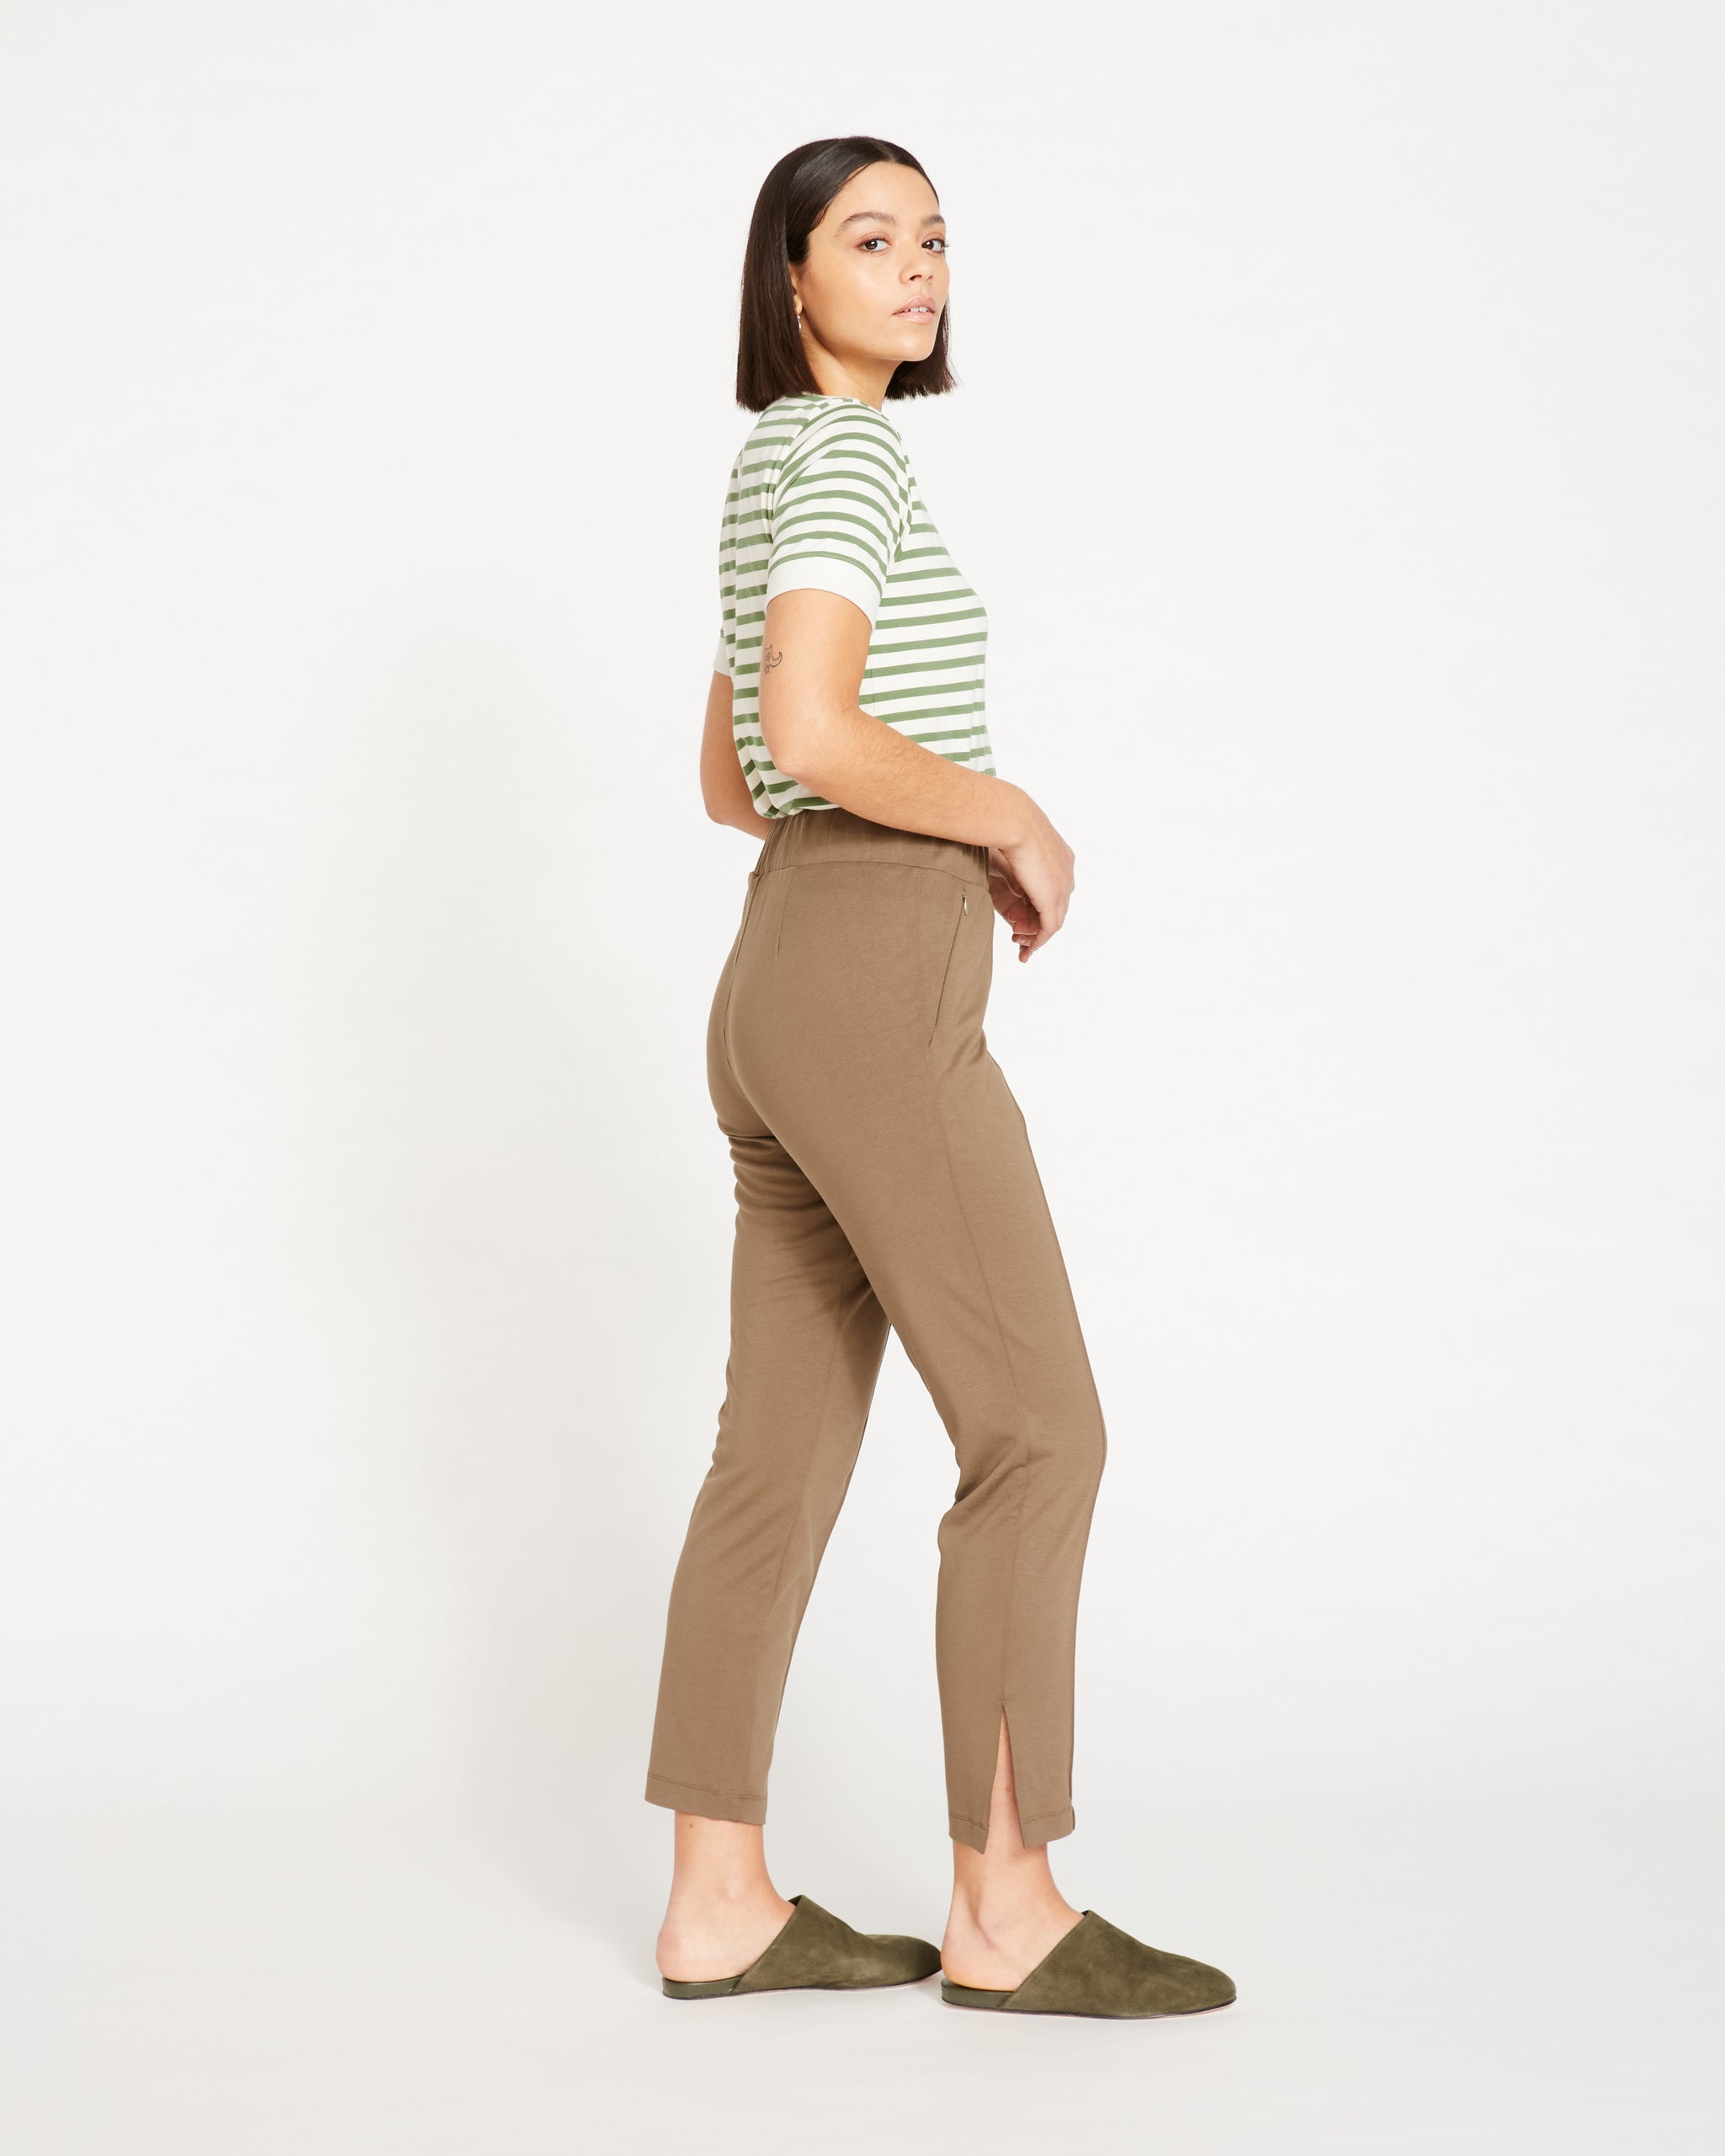 Cotton Pants for Women Loose Fit Business Casual Nepal